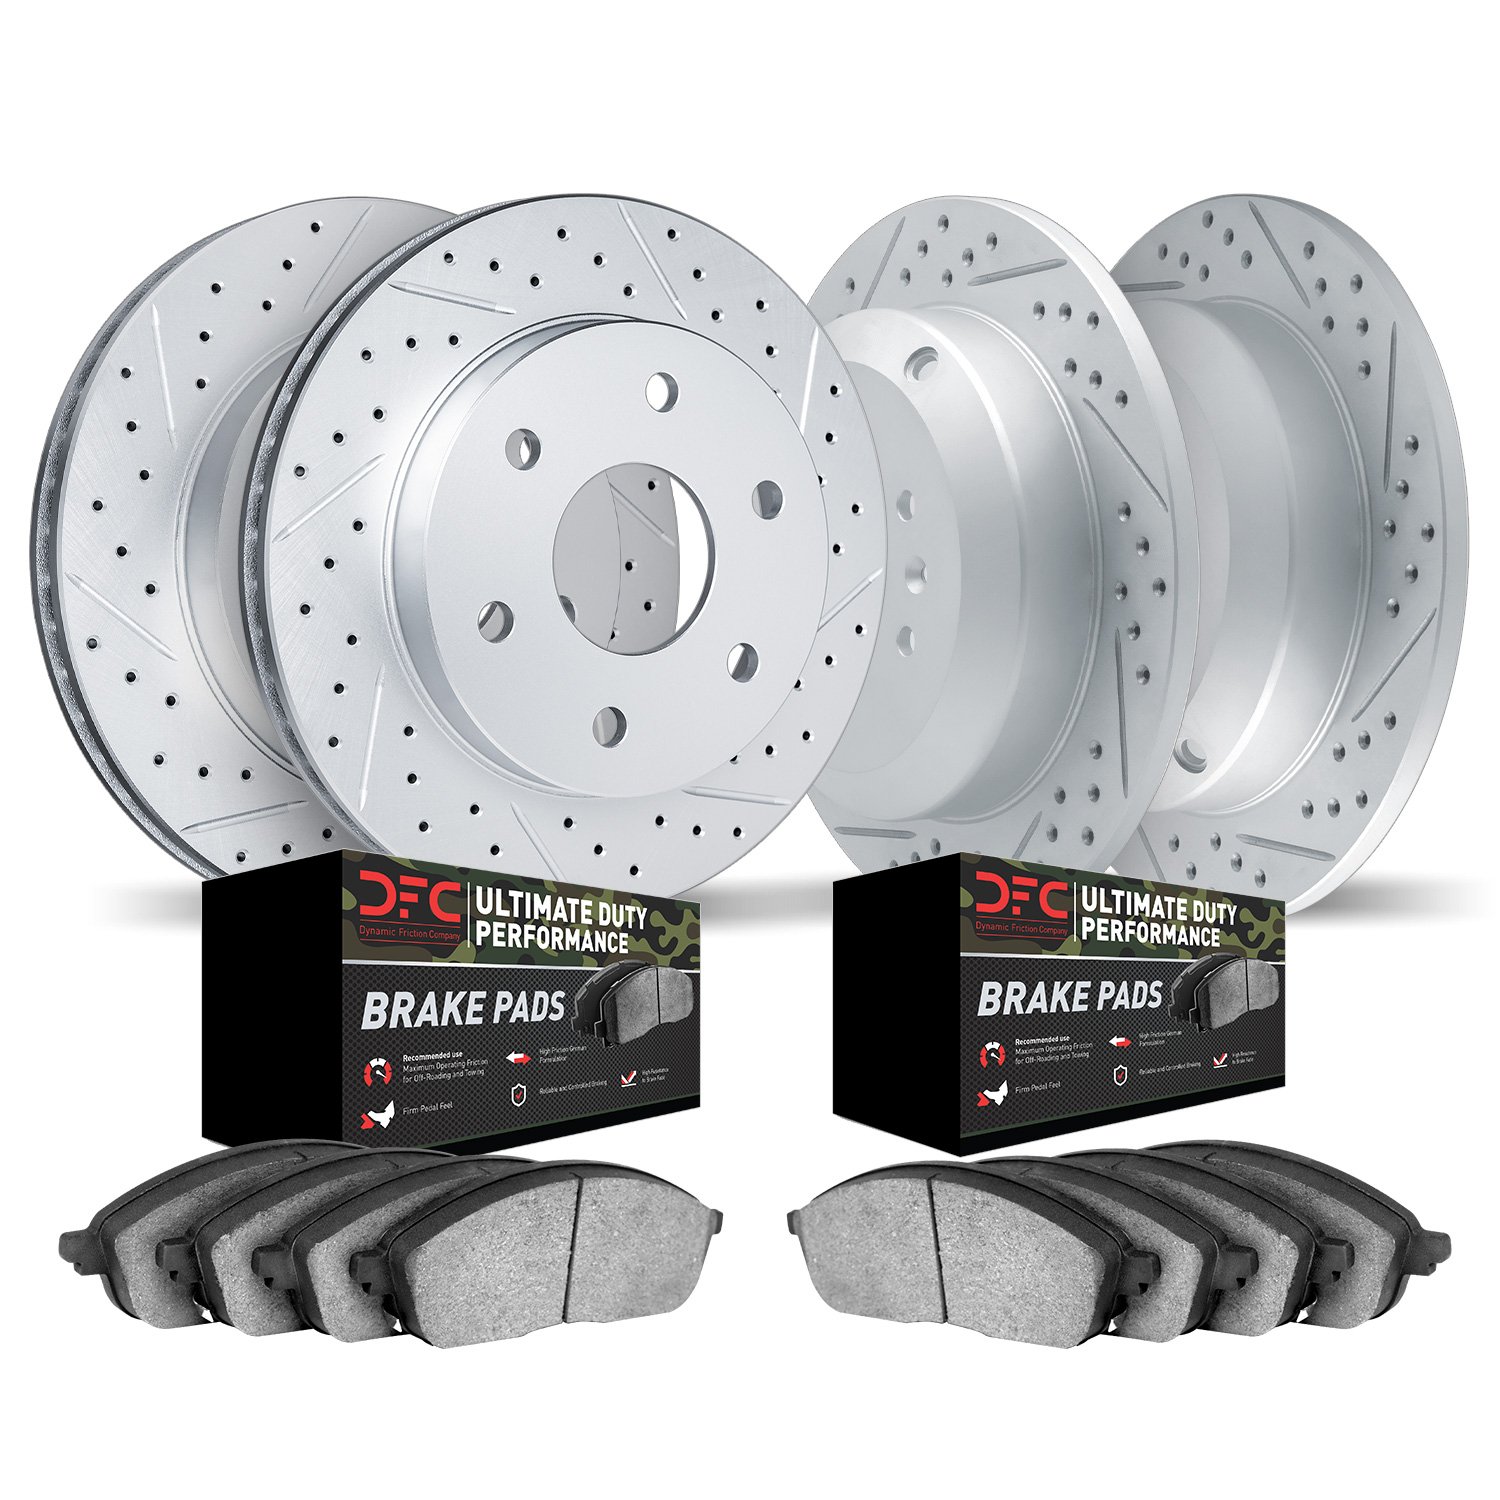 2404-67004 Geoperformance Drilled/Slotted Brake Rotors with Ultimate-Duty Brake Pads Kit, 2007-2015 Infiniti/Nissan, Position: F